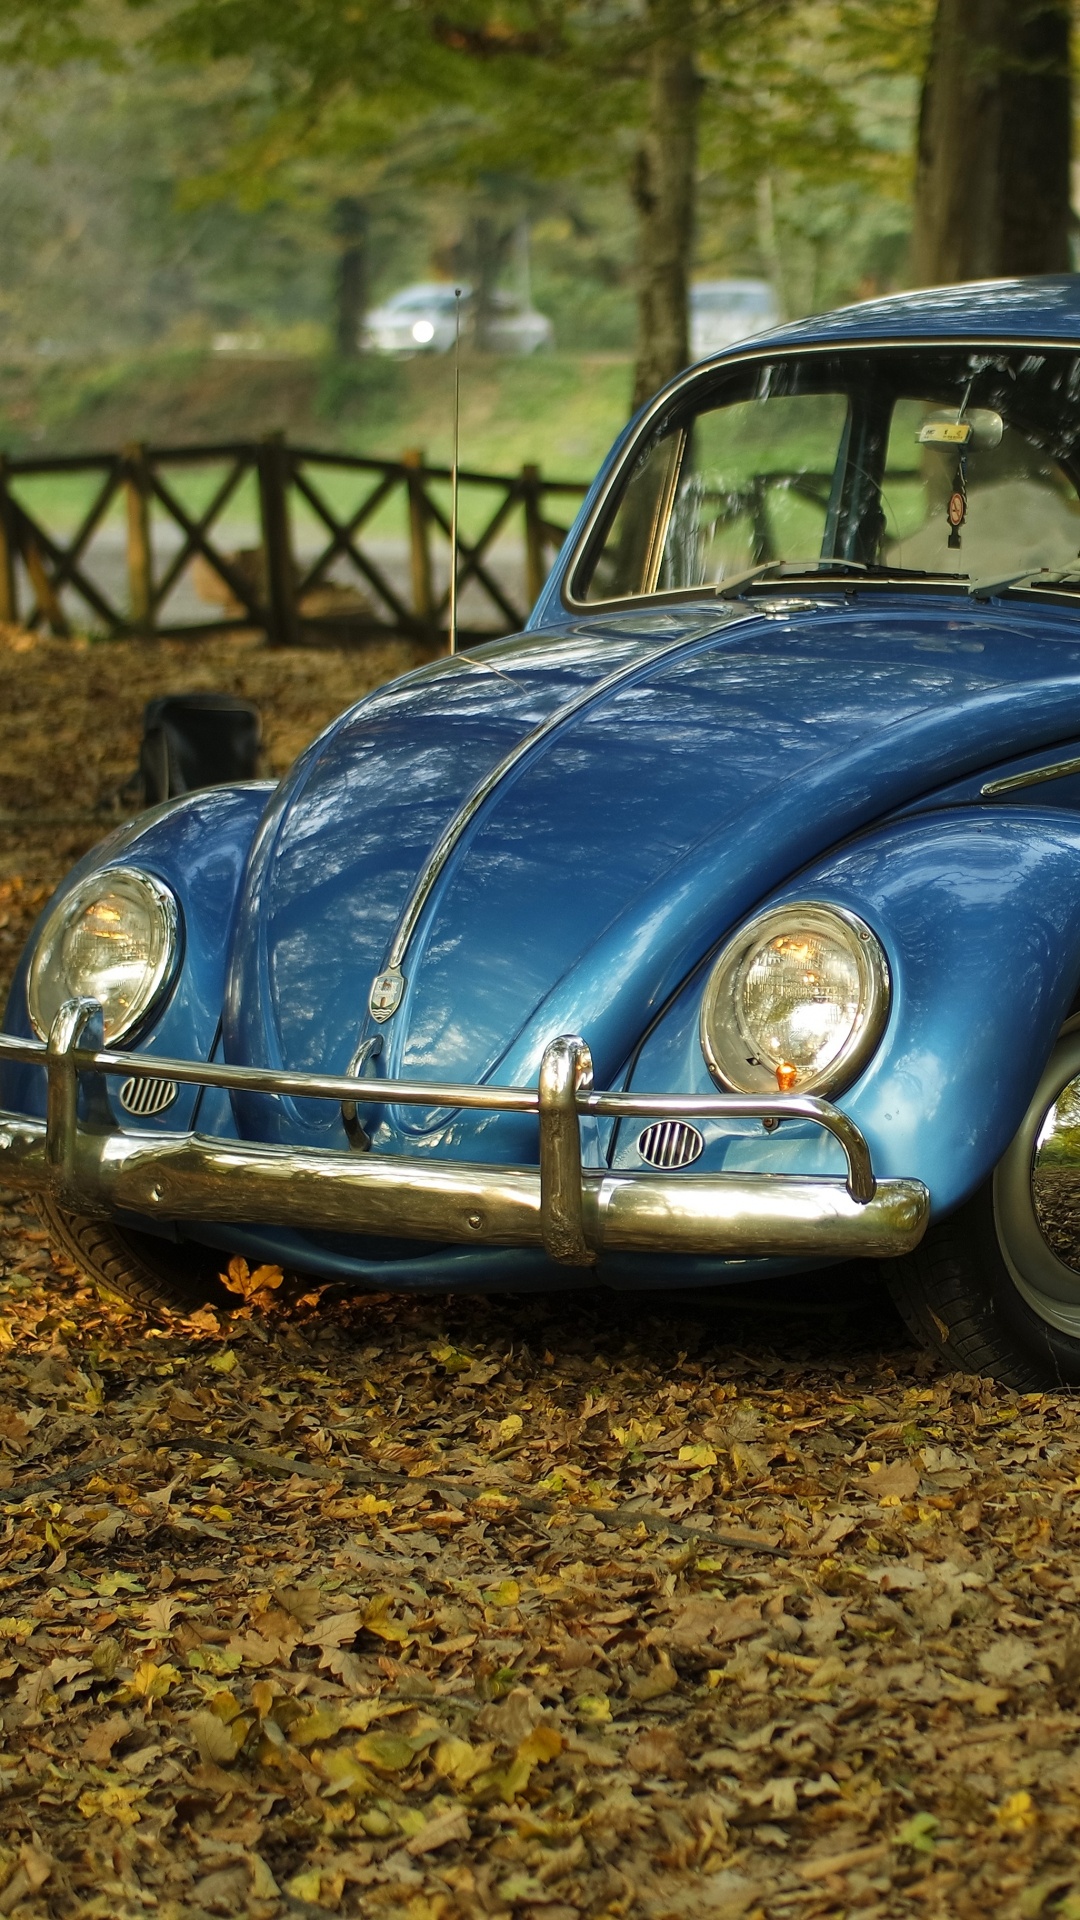 Blue Volkswagen Beetle on Brown Dried Leaves During Daytime. Wallpaper in 1080x1920 Resolution